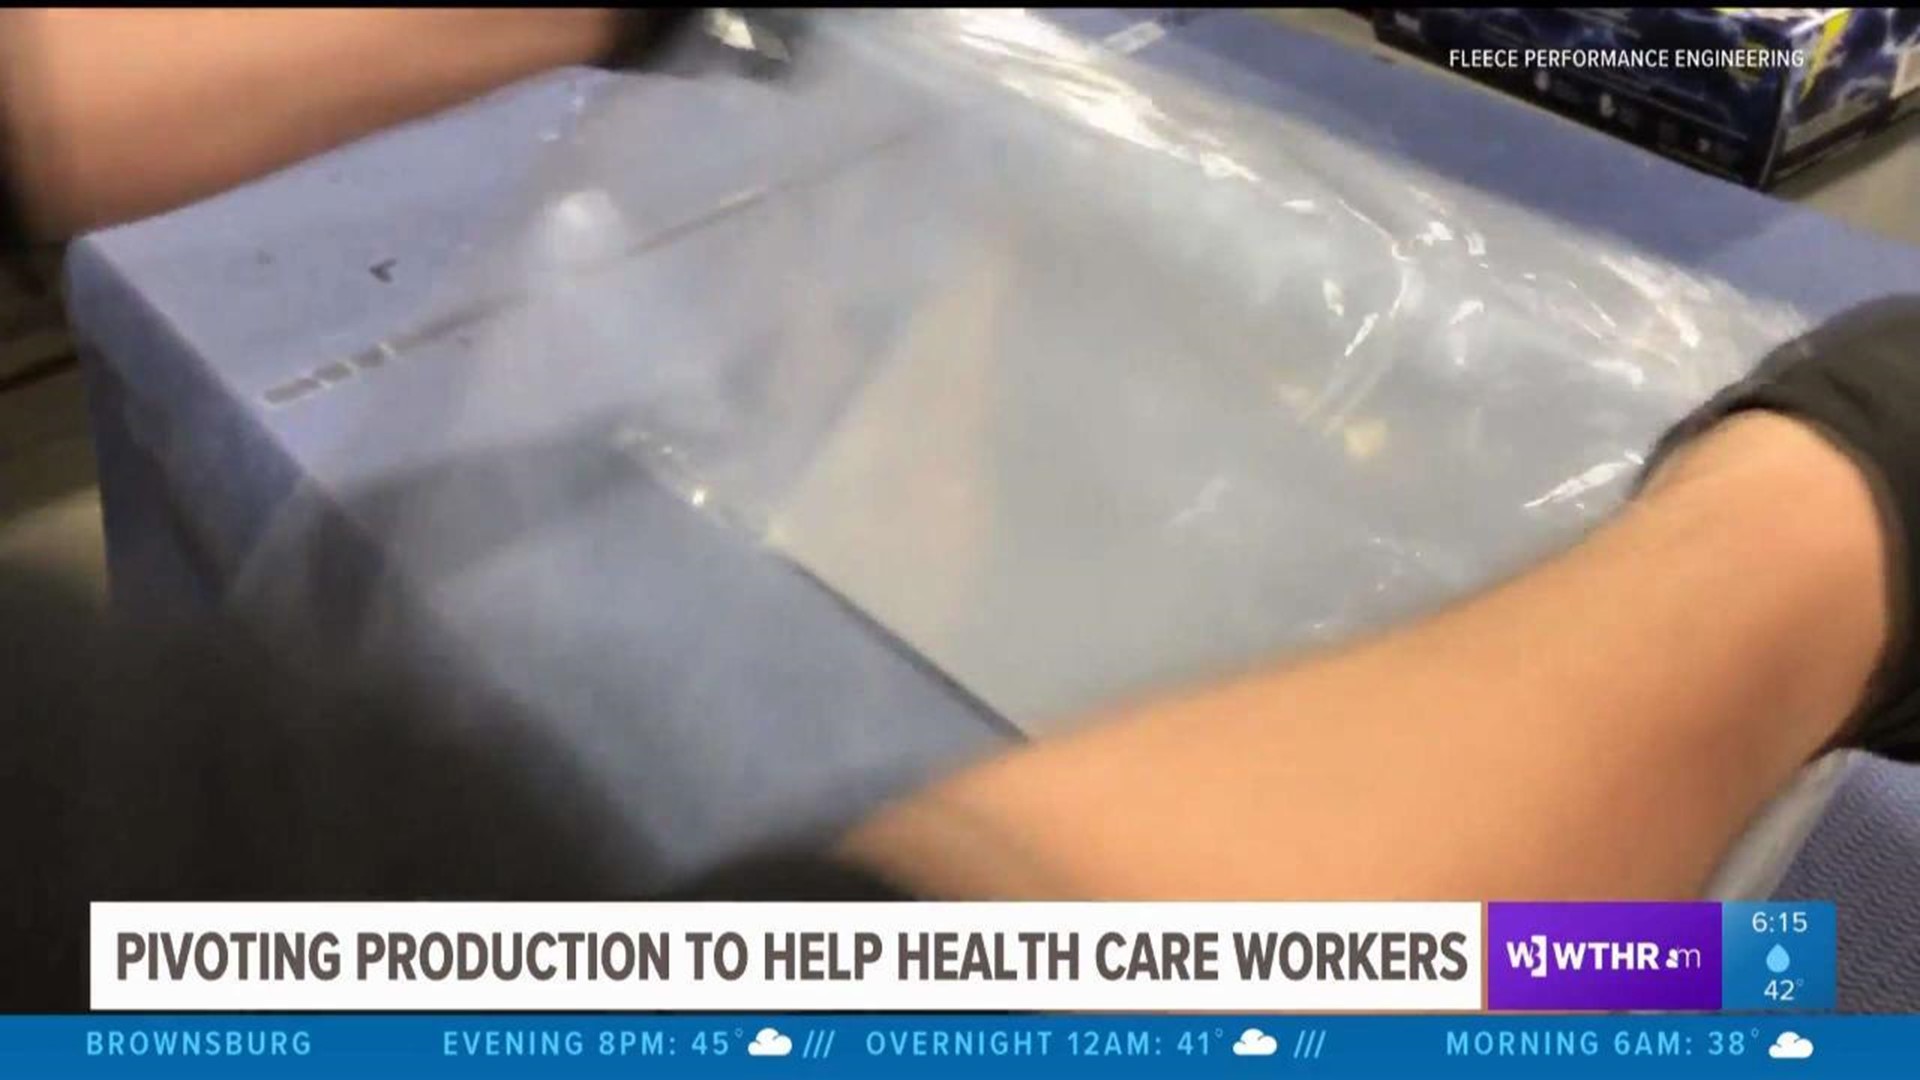 Pivoting production to help healthcare workers